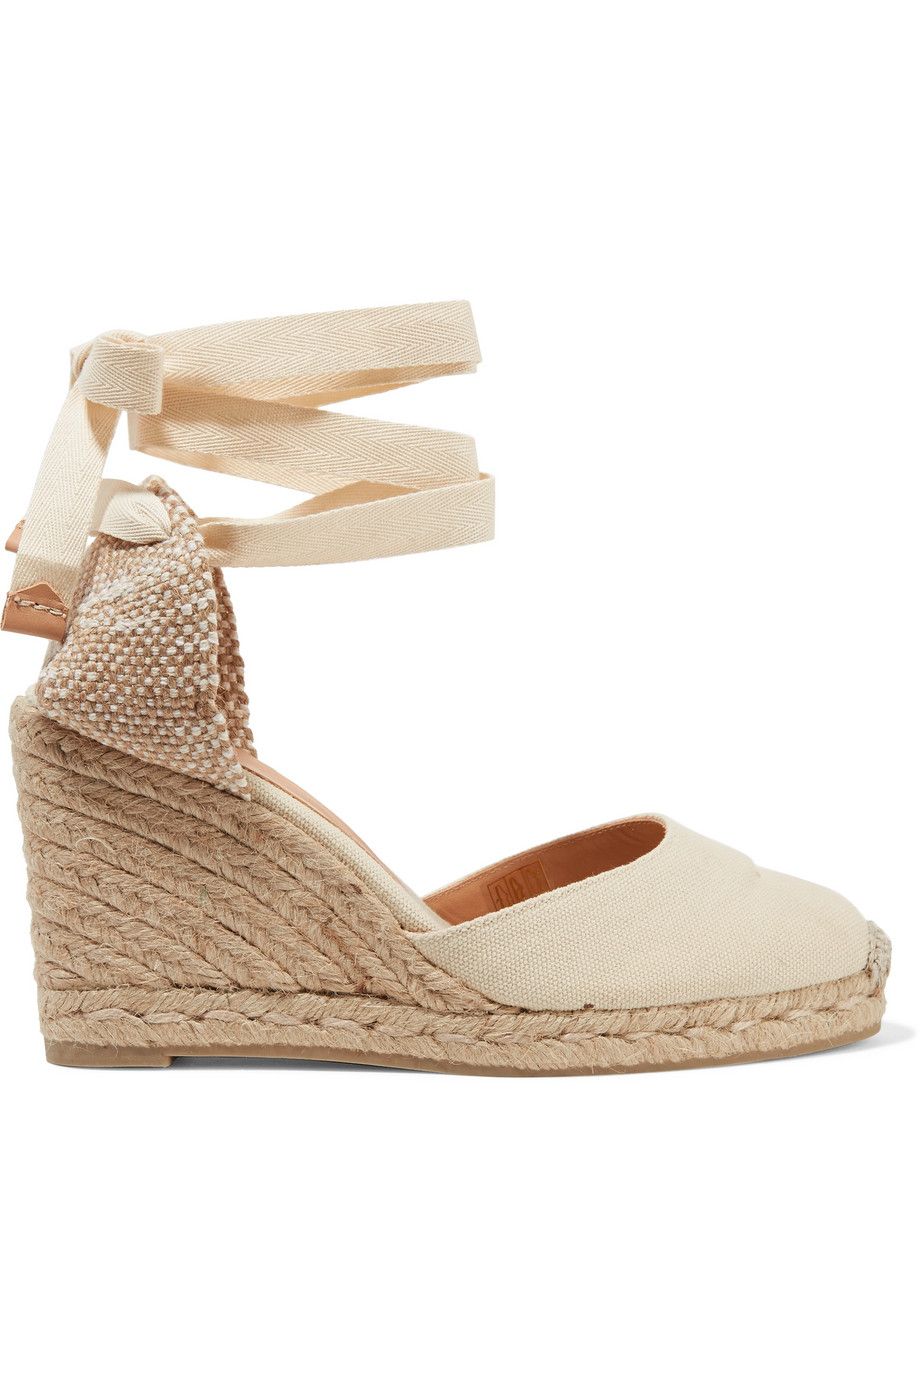 the best wedges shoes